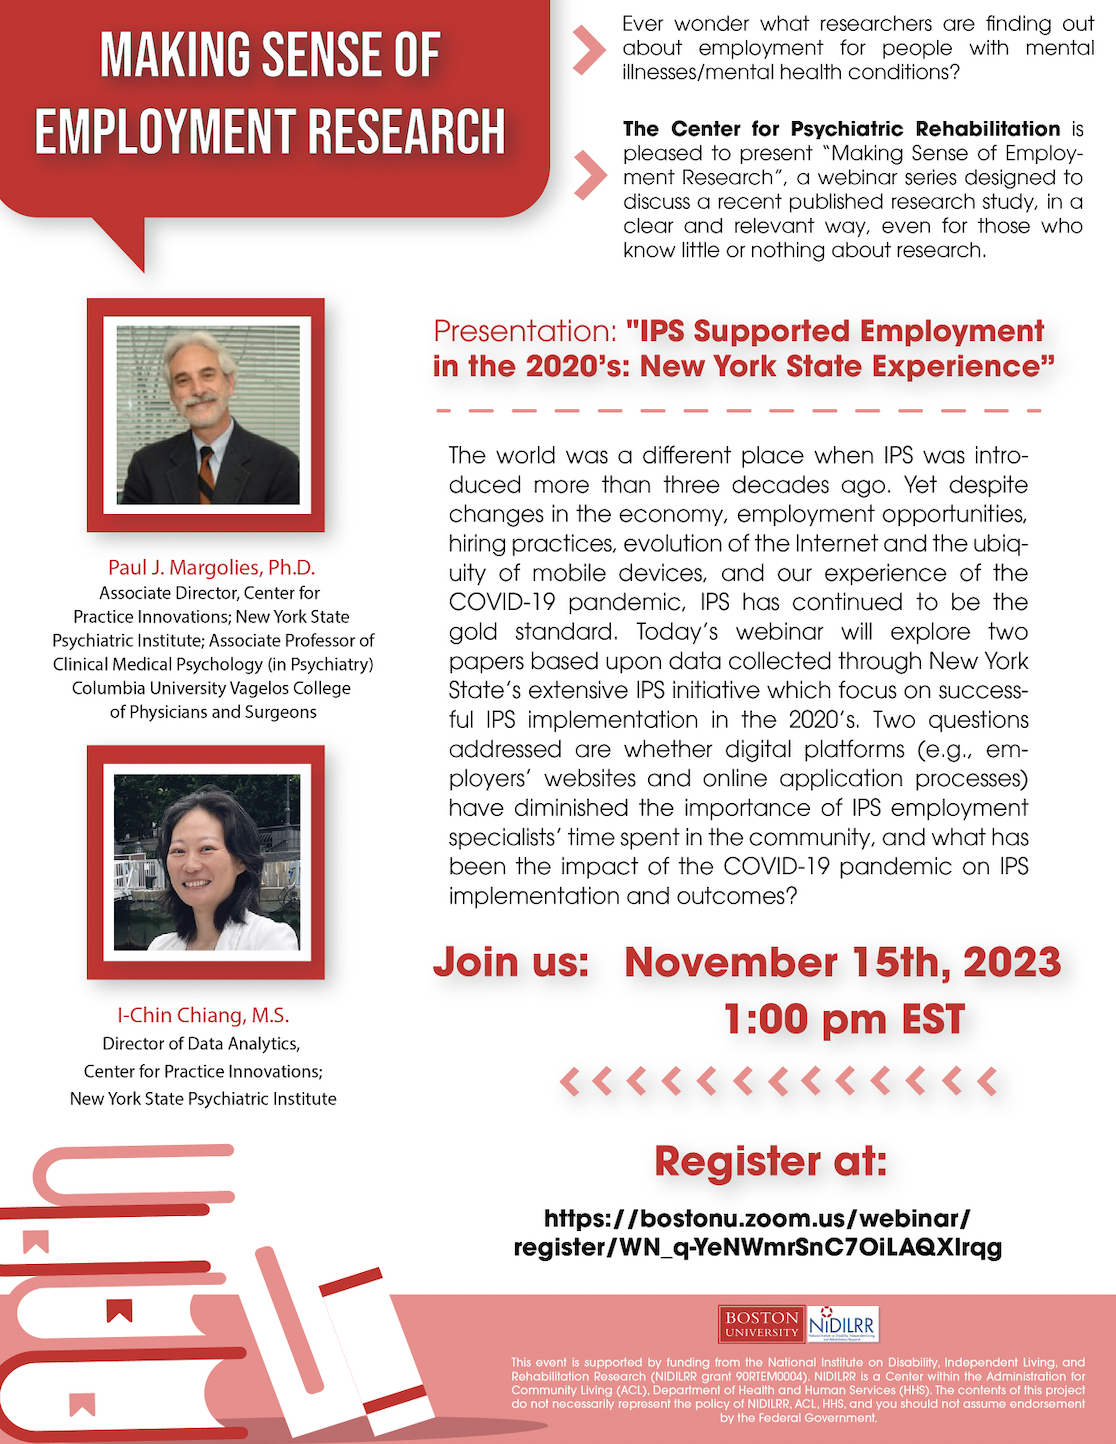 Making Sense of Employment Research: IPS Supported Employment in the 2020’s: New York State Experience Date & Time: Nov 15, 2023 01:00 PM The world was a different place when IPS was introduced more than three decades ago. Yet despite changes in the economy, employment opportunities, hiring practices, evolution of the Internet and the ubiquity of mobile devices, and our experience of the COVID-19 pandemic, IPS has continued to be the gold standard. Today’s webinar will explore two papers based upon data collected through New York State’s extensive IPS initiative which focus on successful IPS implementation in the 2020’s. Two questions addressed are whether digital platforms (e.g., employers’ websites and online application processes) have diminished the importance of IPS employment specialists’ time spent in the community, and what has been the impact of the COVID-19 pandemic on IPS implementation and outcomes? Paul J. Margolies, Ph.D. is Associate Director for Practice Innovation and Implementation at the Center for Practice Innovations at Columbia Psychiatry (CPI), located at New York State Psychiatric Institute and Associate Professor of Clinical Medical Psychology (in Psychiatry) at Columbia University Vagelos College of Physicians and Surgeons. Dr. Margolies is a licensed psychologist who received his doctoral degree in clinical psychology from the State University of New York at Stony Brook. I-Chin Chiang, M.S. is Director of Data Analytics at the Center for Practice Innovations at Columbia Psychiatry (CPI), located at New York State Psychiatric Institute. Ms. Chiang received her training in computer science from the California State University, Fullerton and the University of California, Irvine, and considers herself as a generalist with experience in database development, data analysis & reporting, and quality assurance testing. 